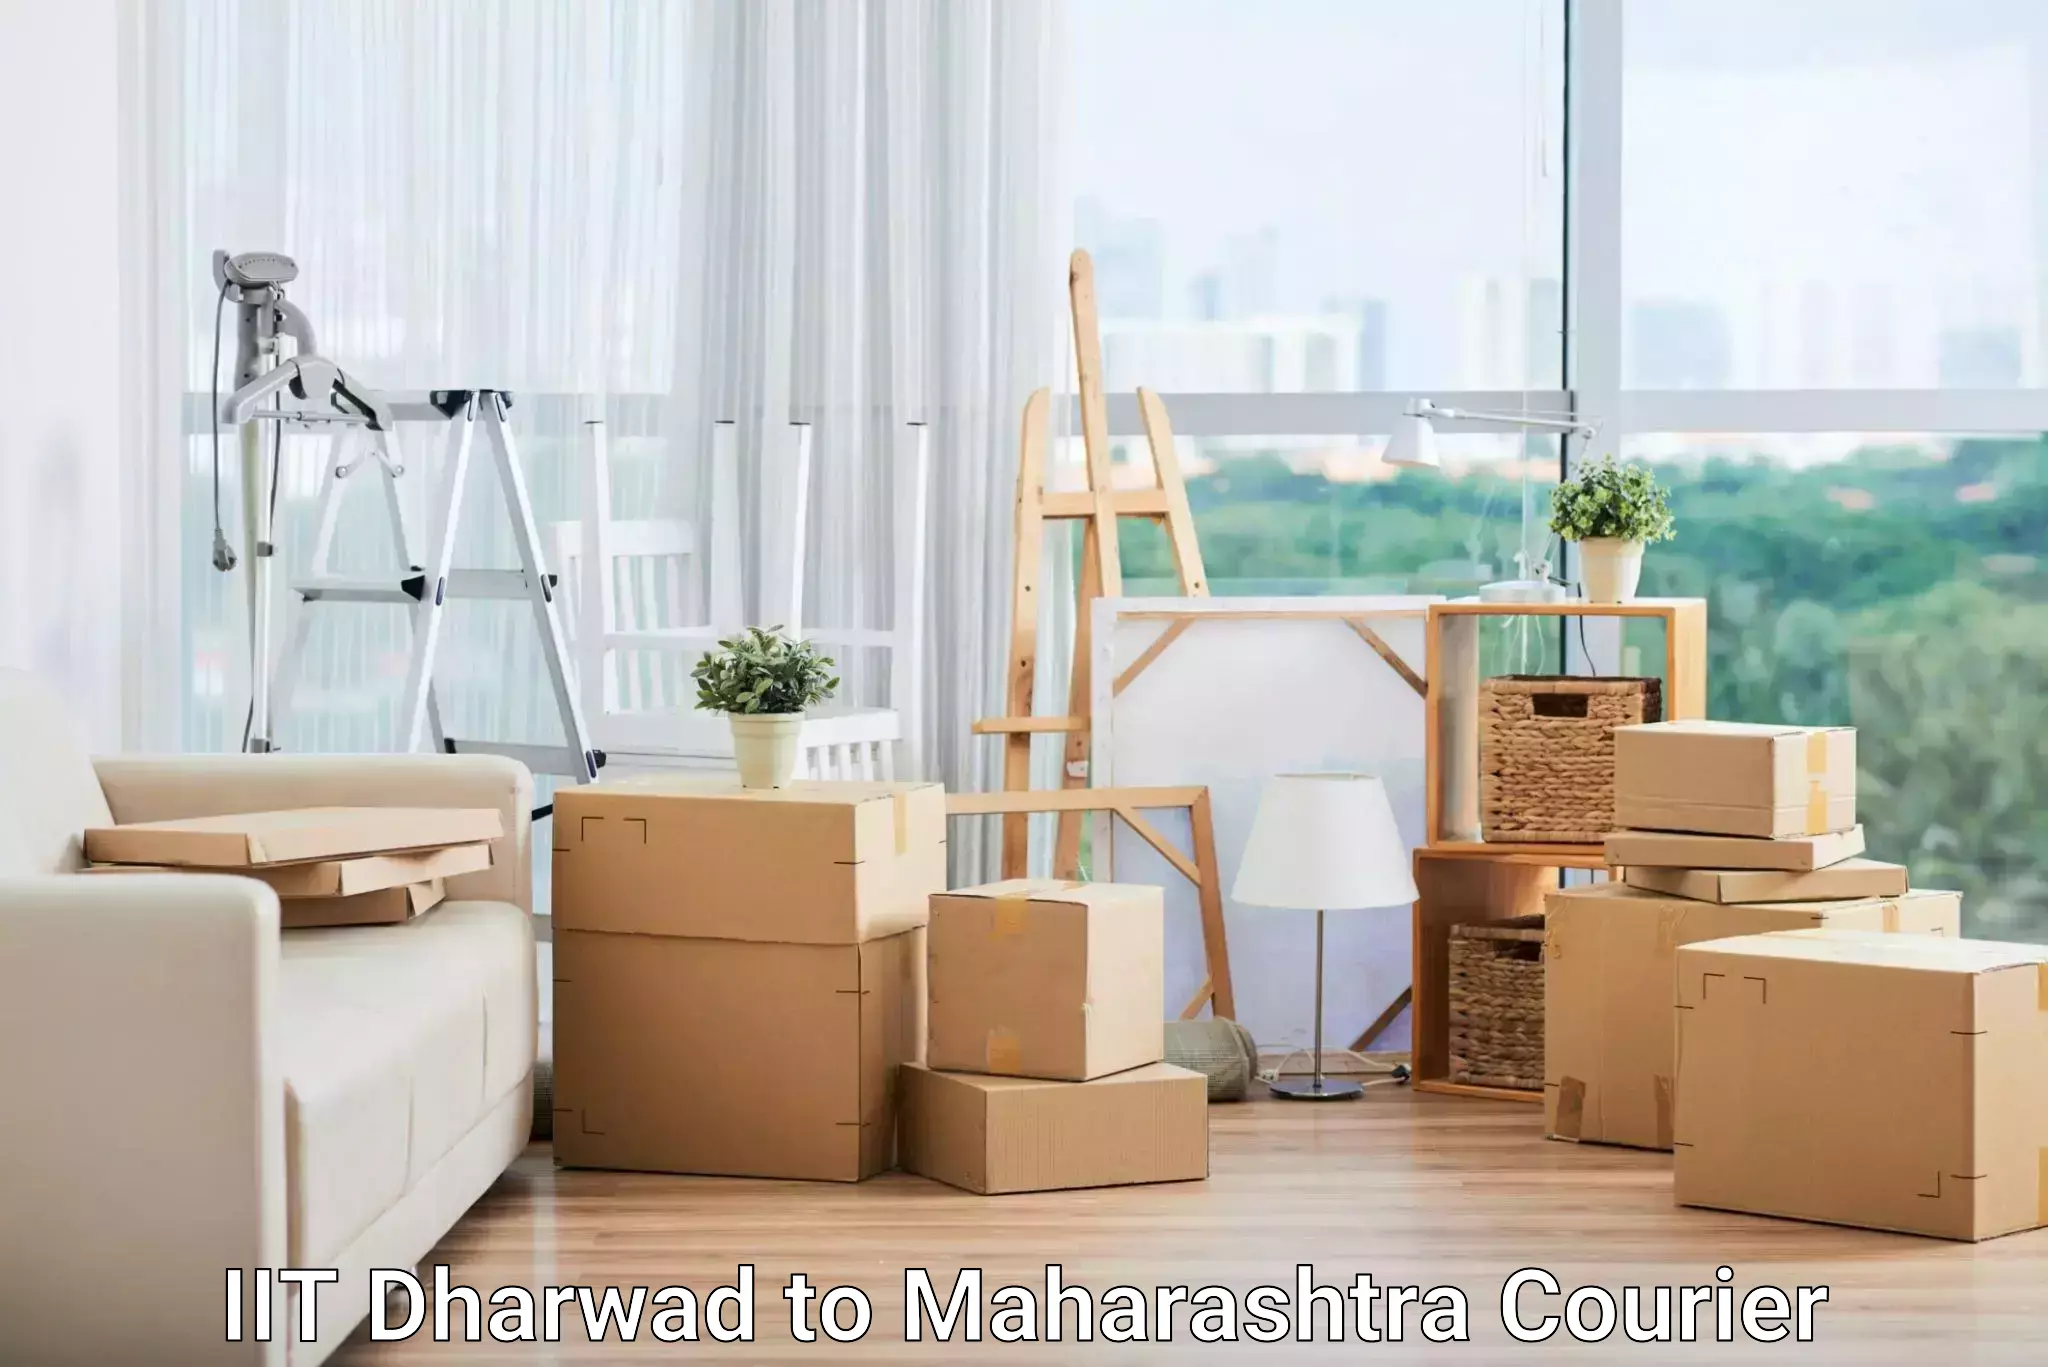 Ocean freight courier IIT Dharwad to Maharashtra